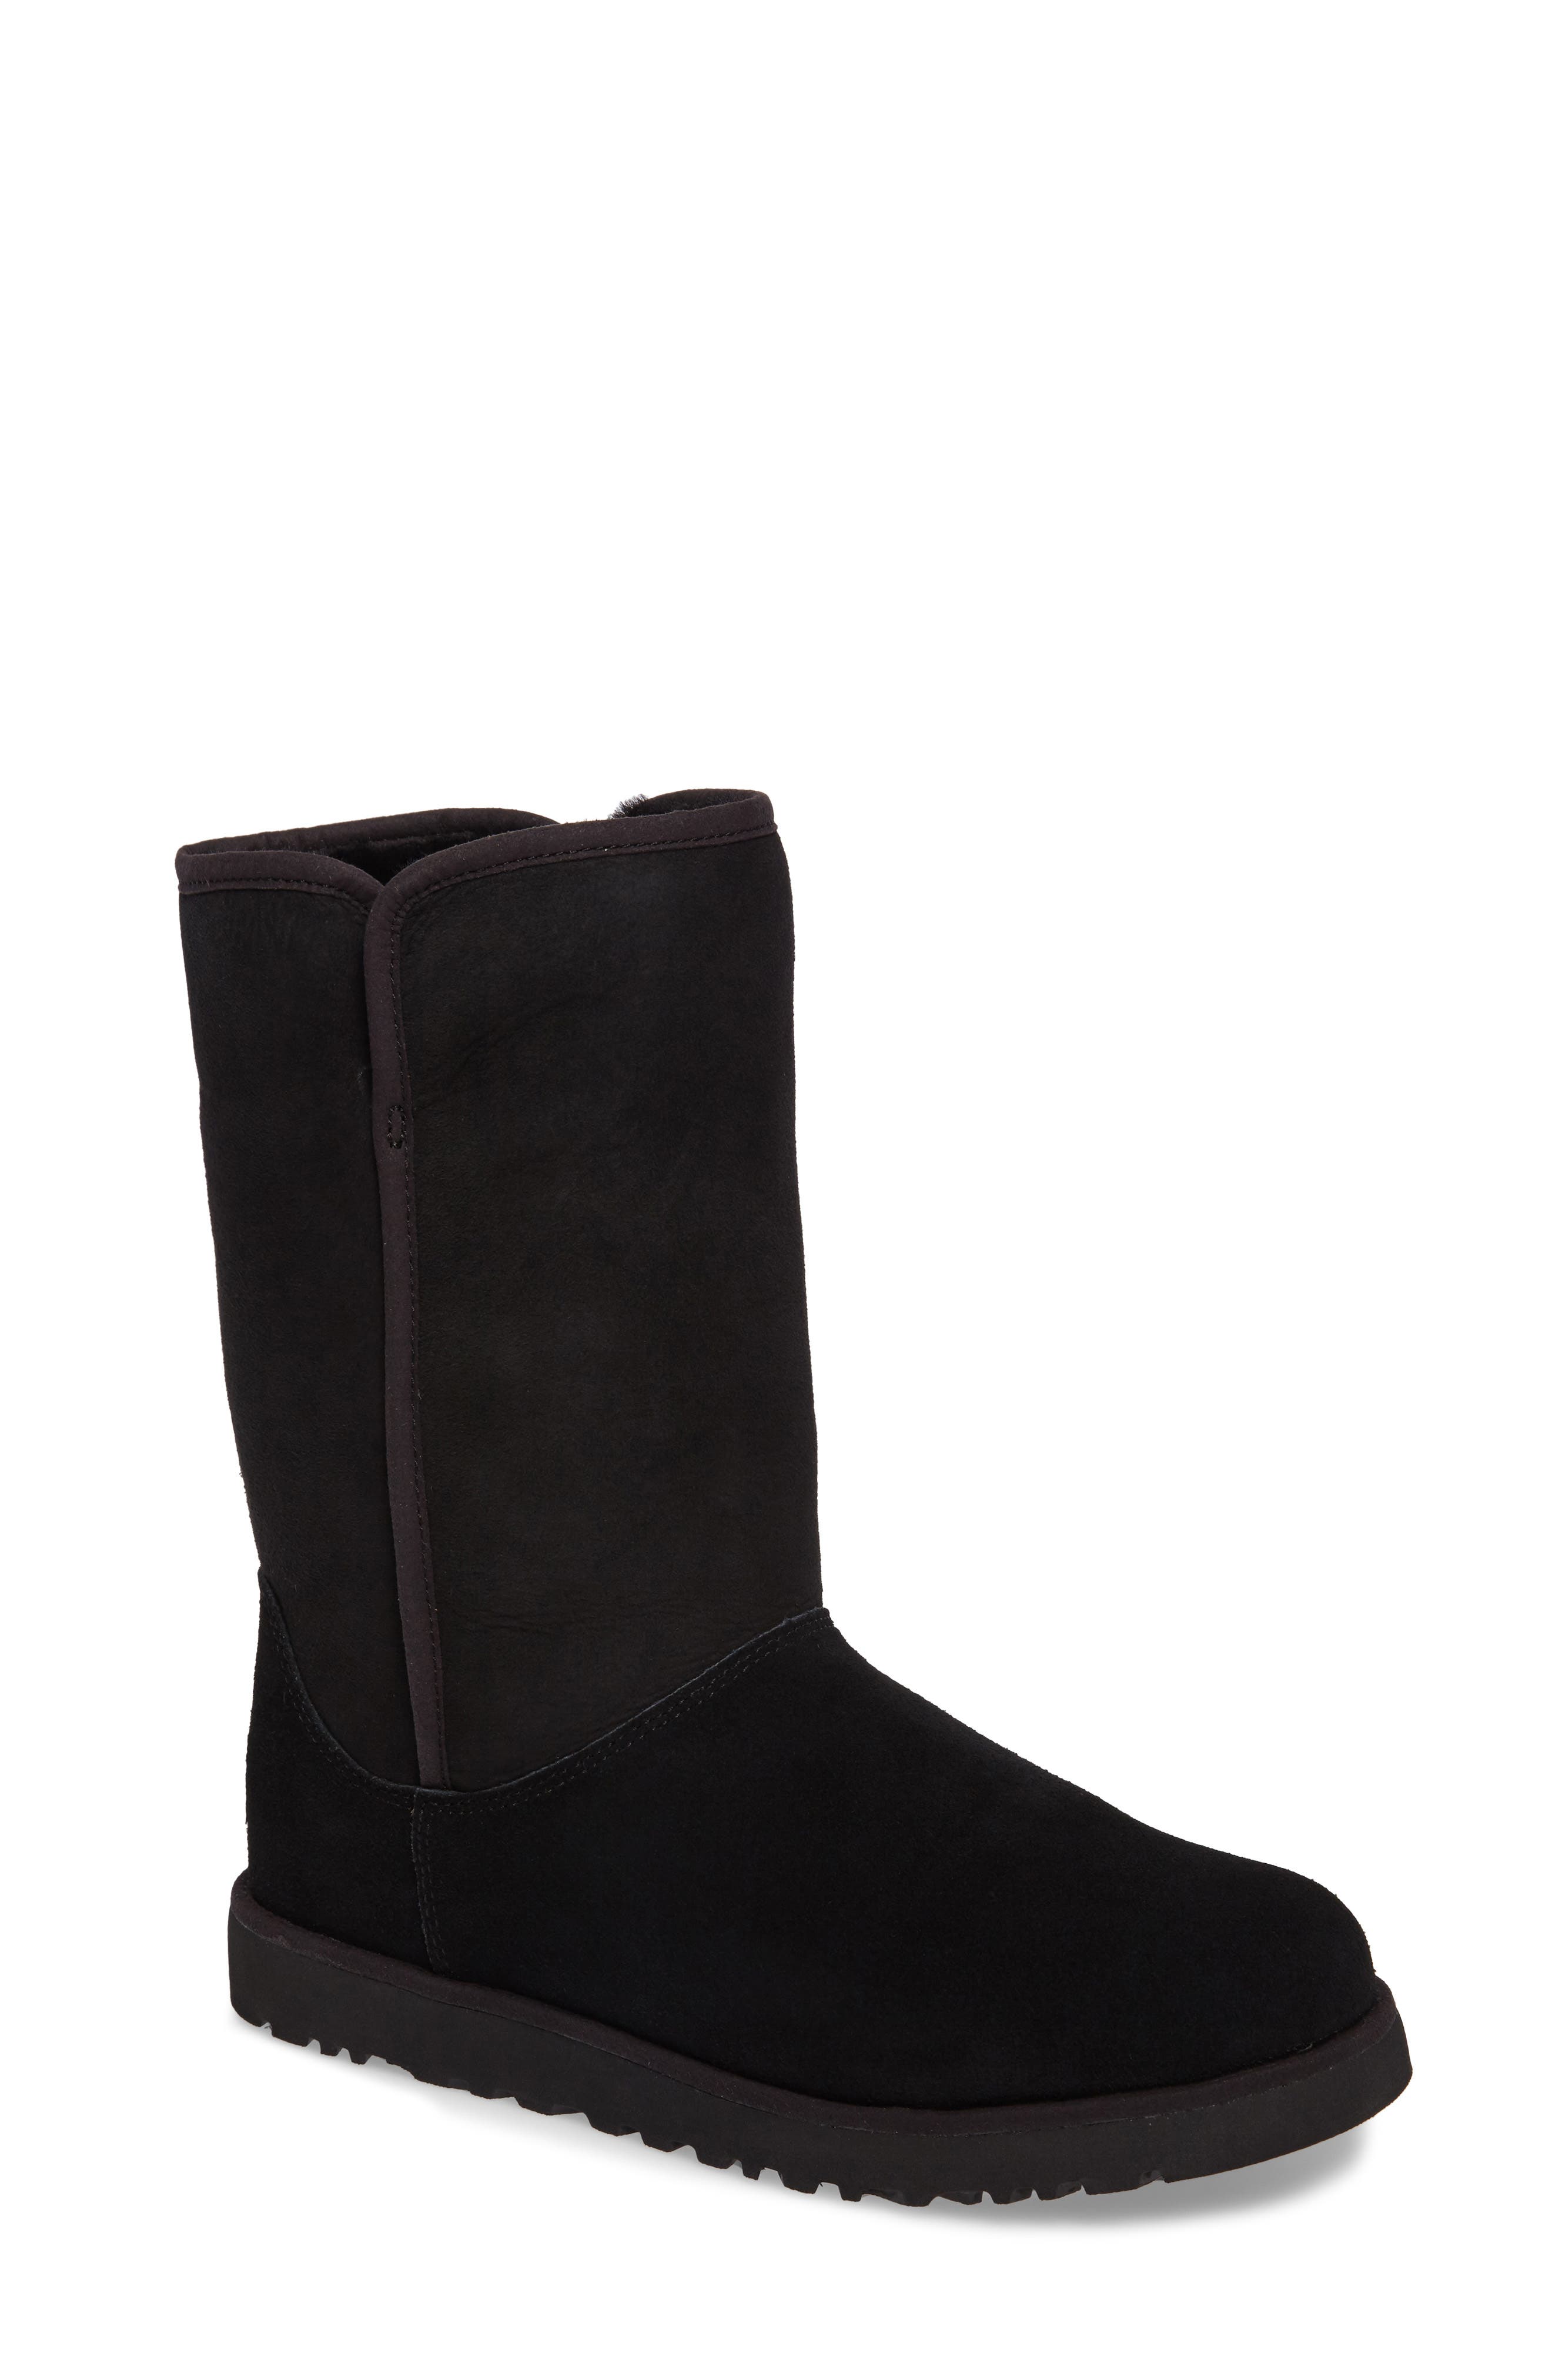 ugg michelle leather boots